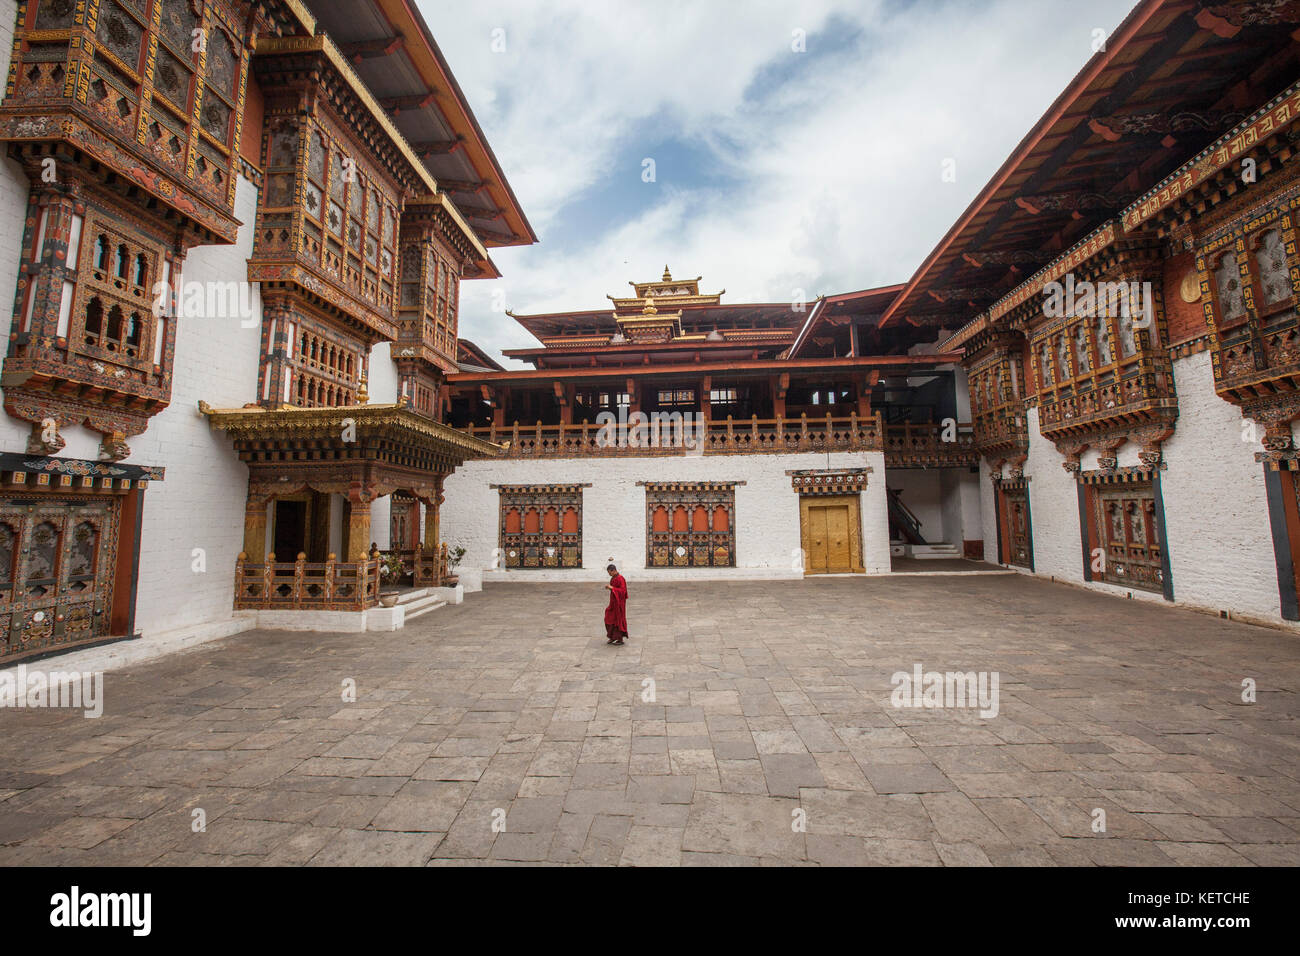 A buddhist monk dressed in red walks in the sacred monastery Thimphu Wangdue Bhutan Asia Stock Photo